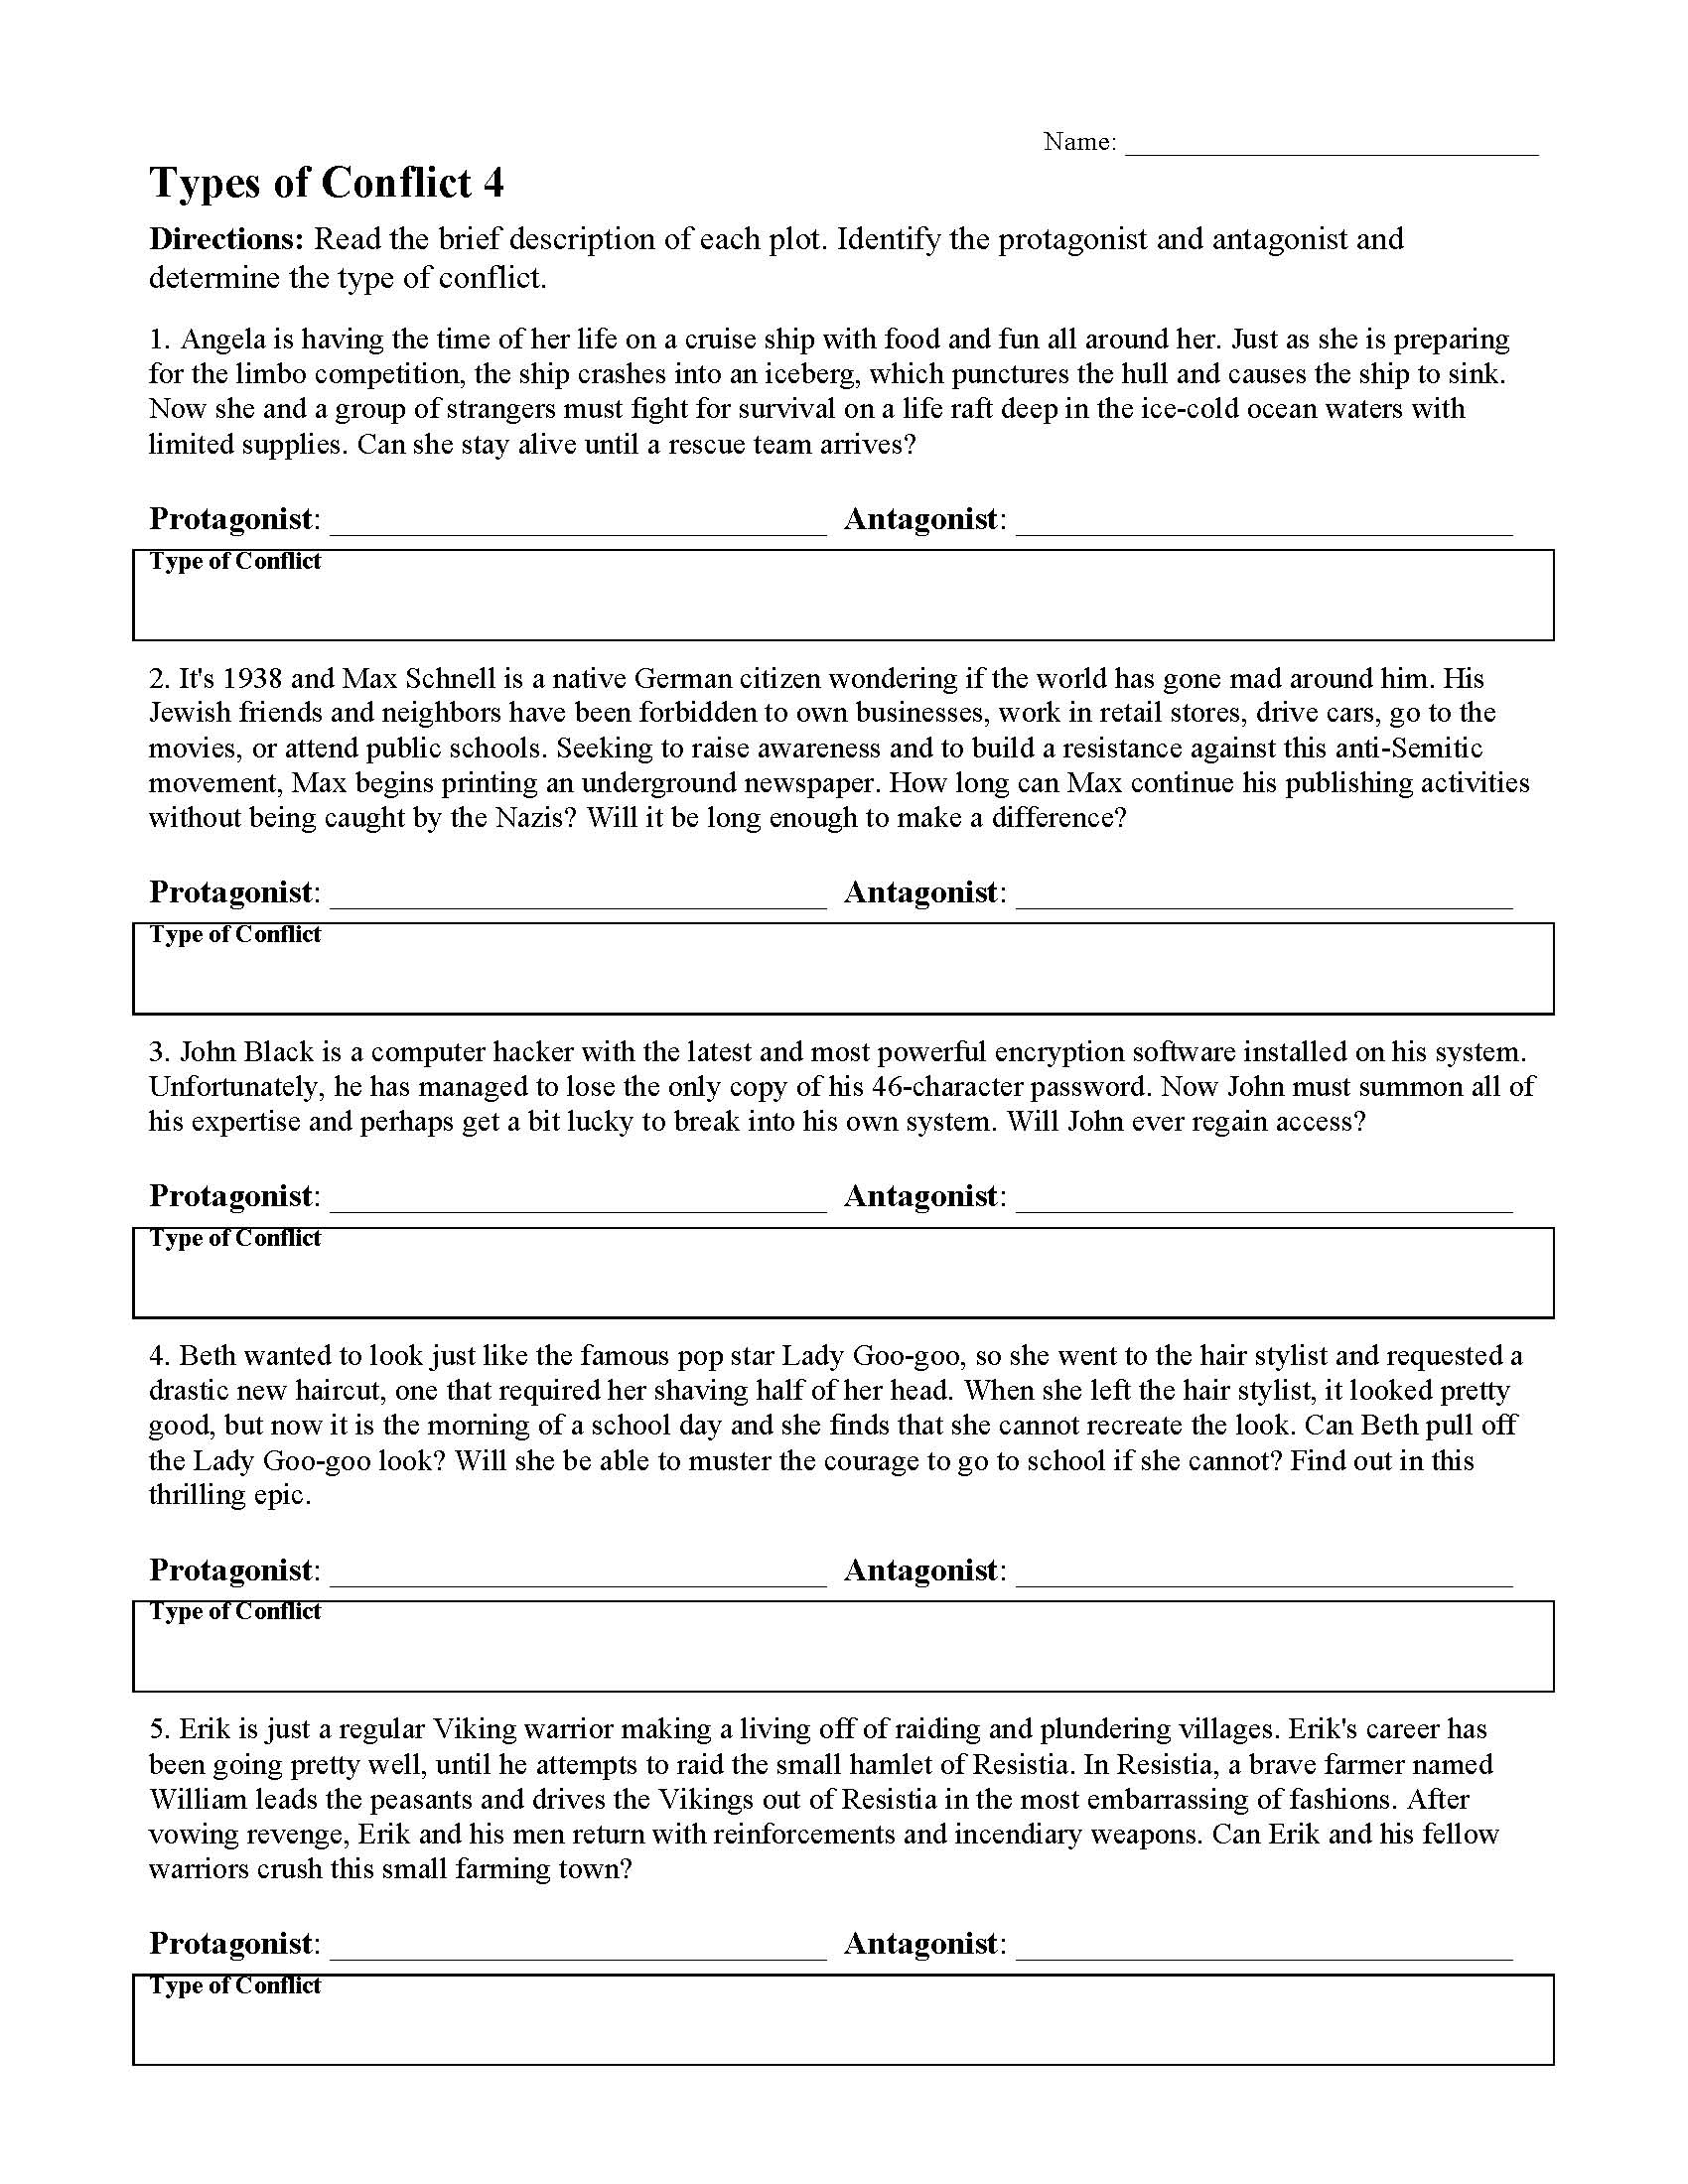 This is a preview image of Types of Conflict Worksheet 4. Click on it to enlarge it or view the source file.